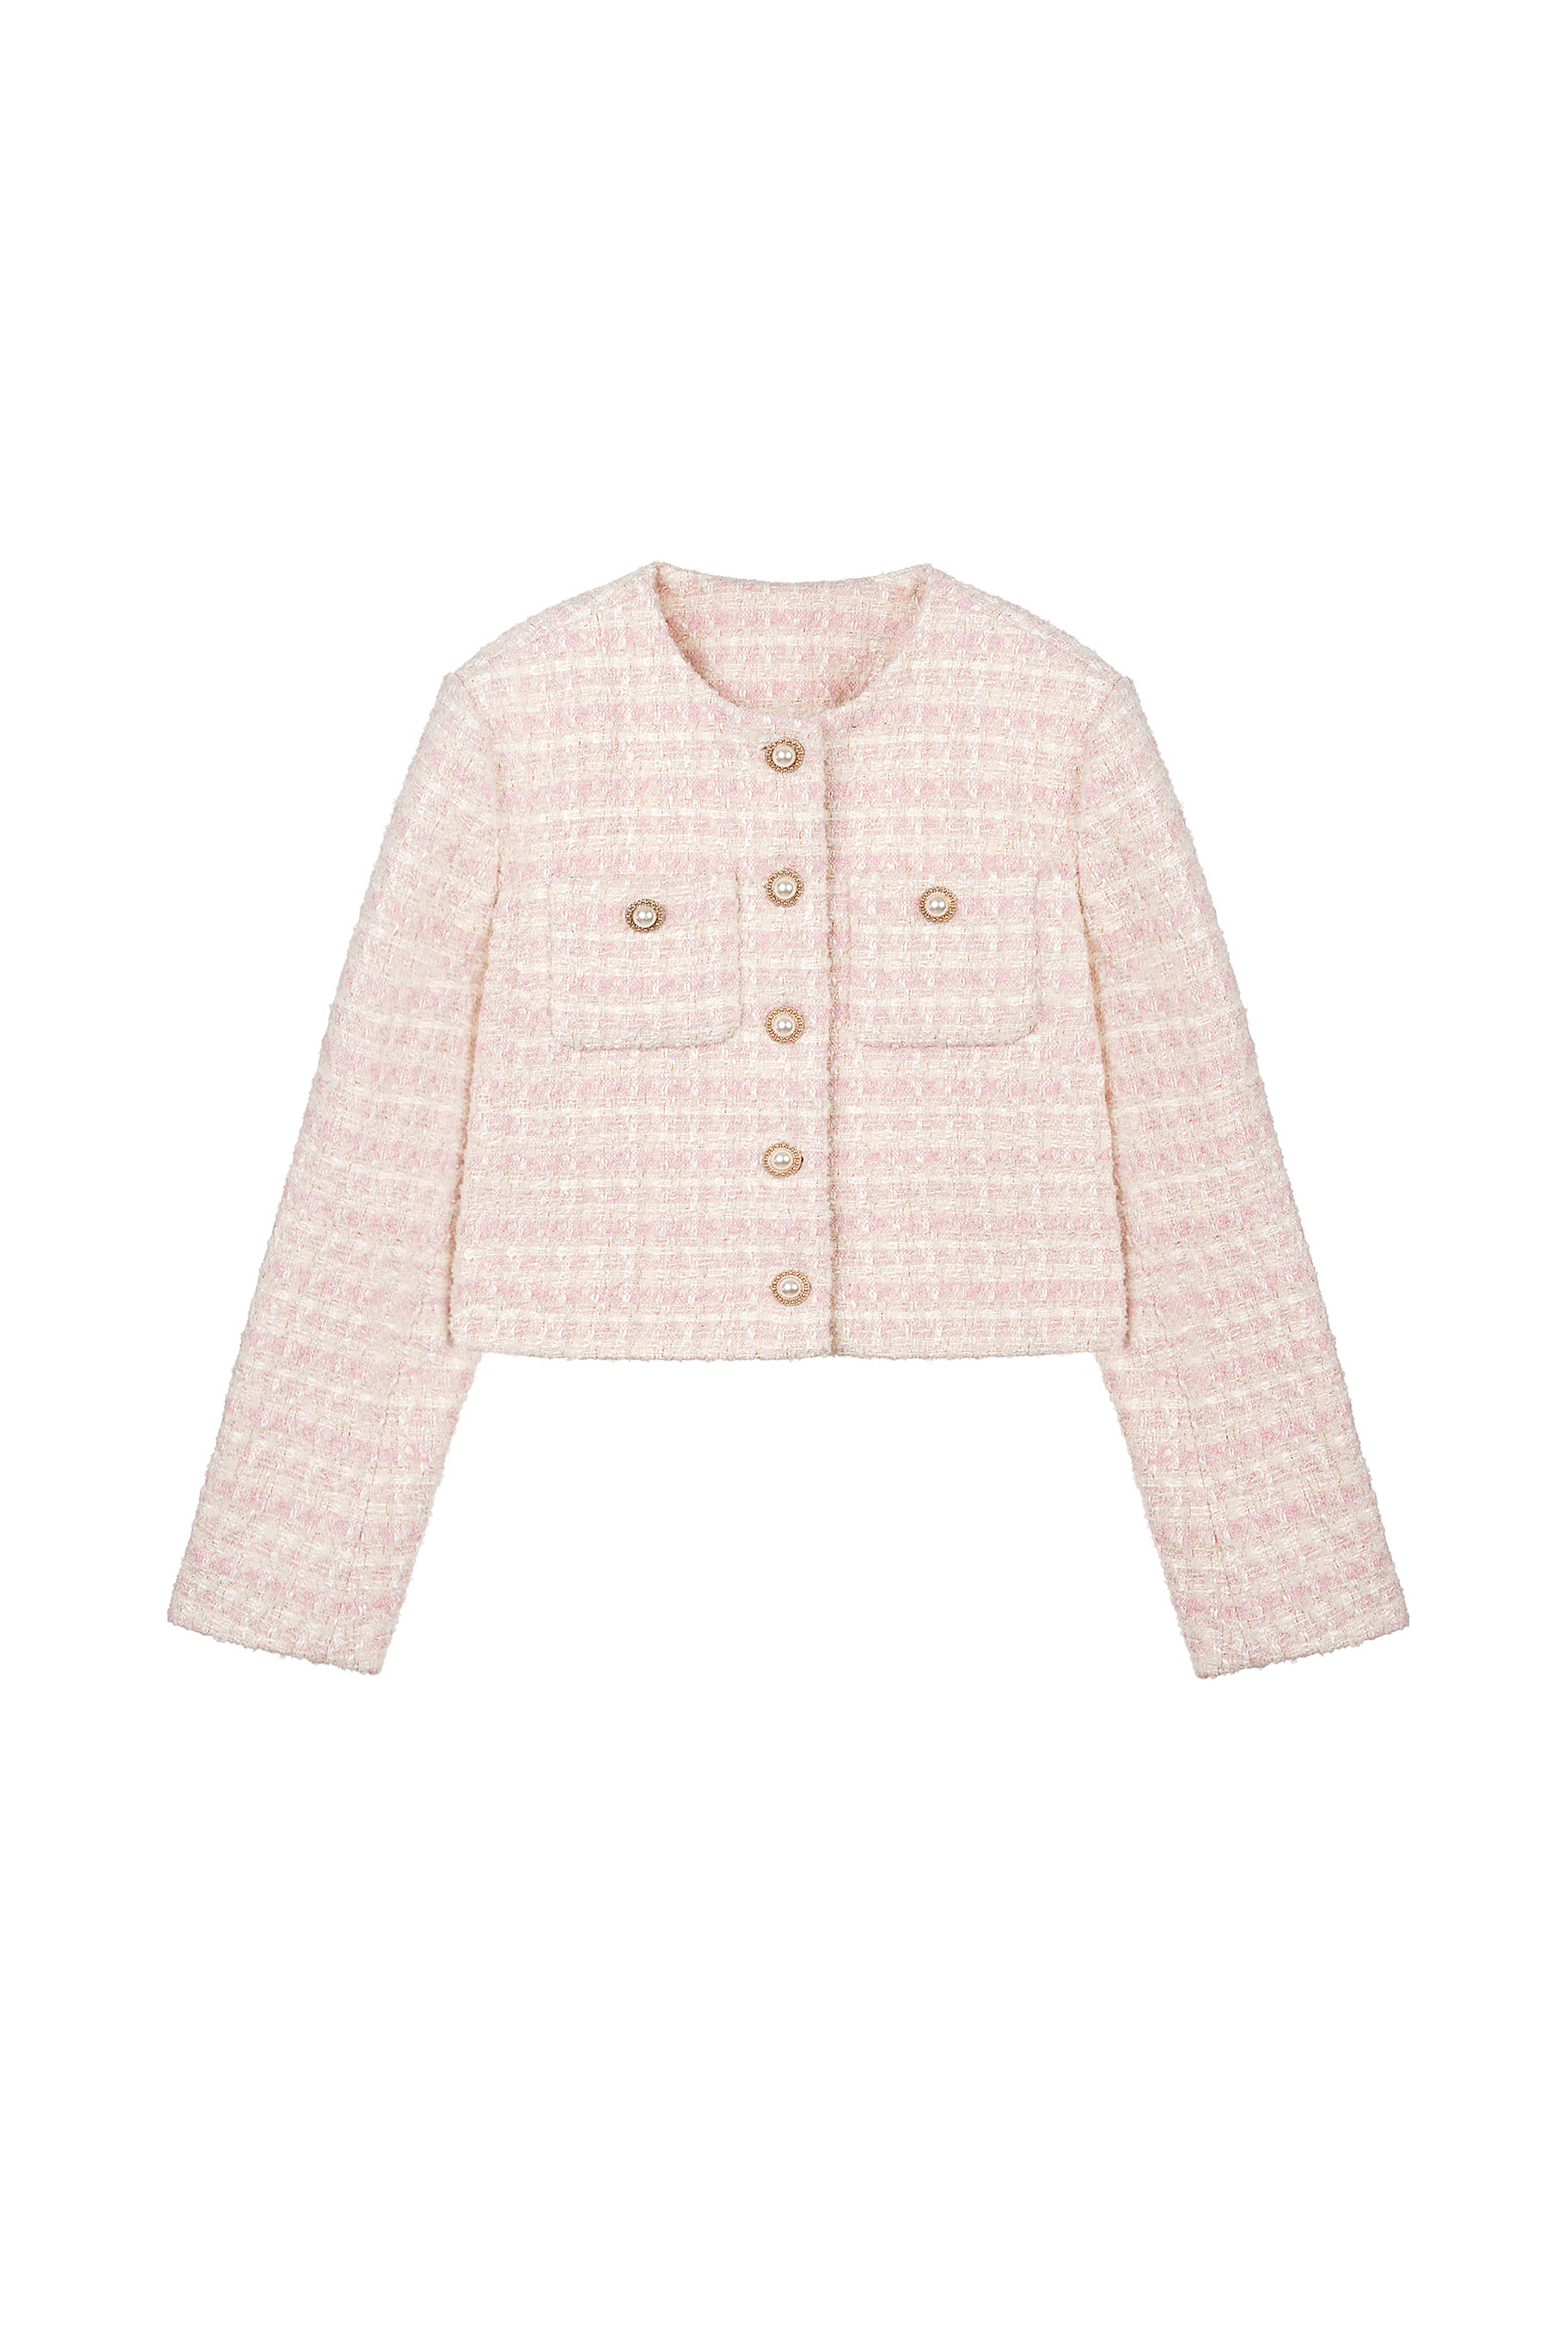 Marché Houndtooth Tweed JK Baby Pink